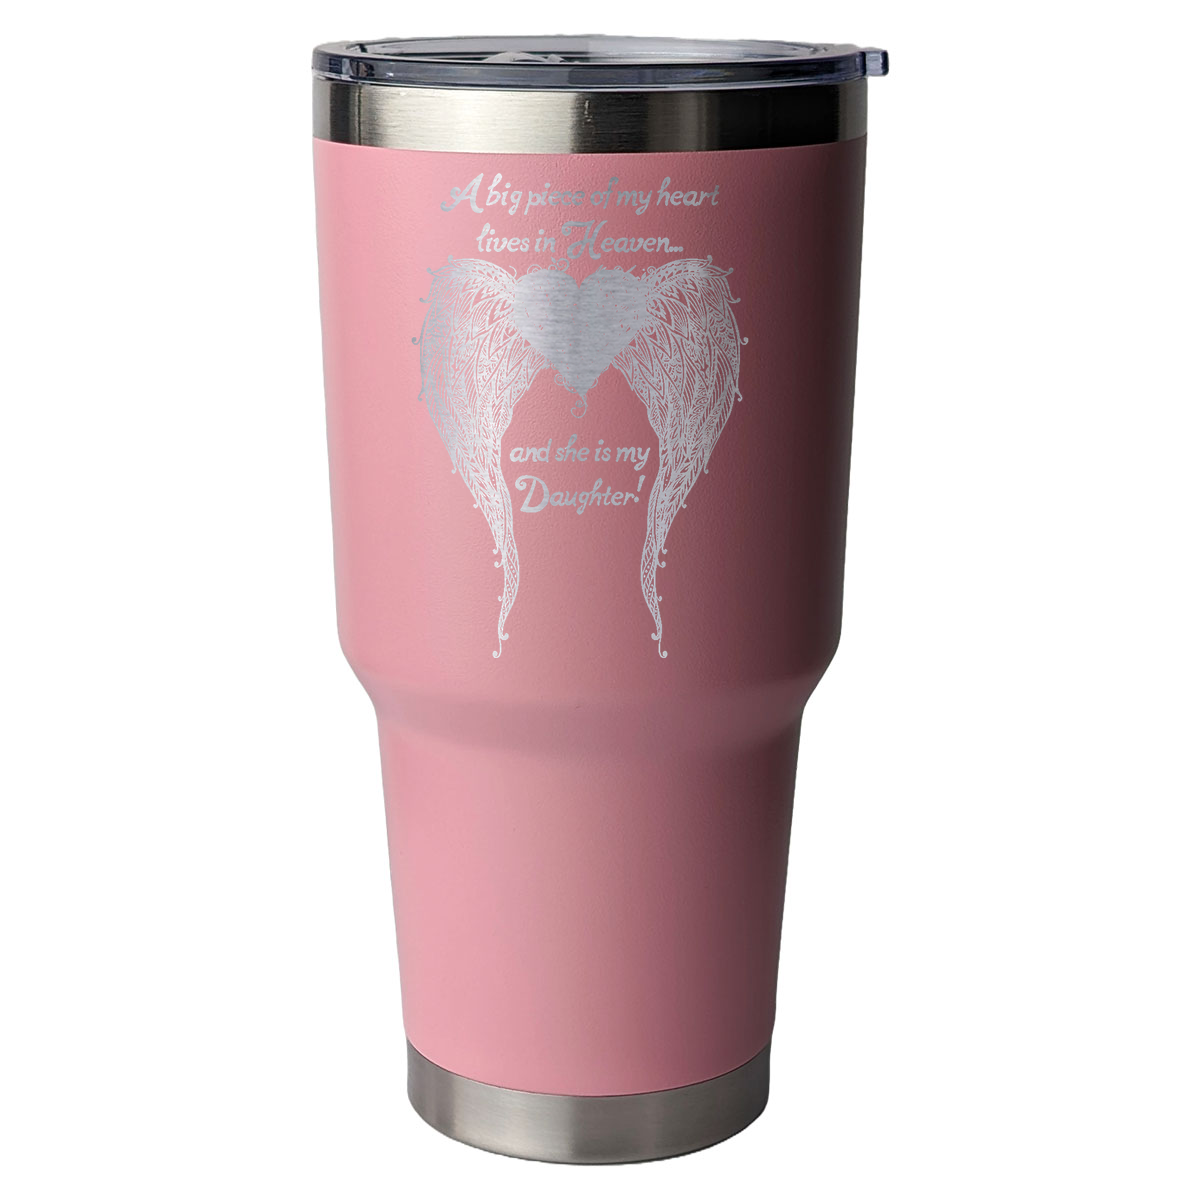 Daughter - A Big Piece of my Heart 30 Ounce Laser Etched Tumbler Light Pink